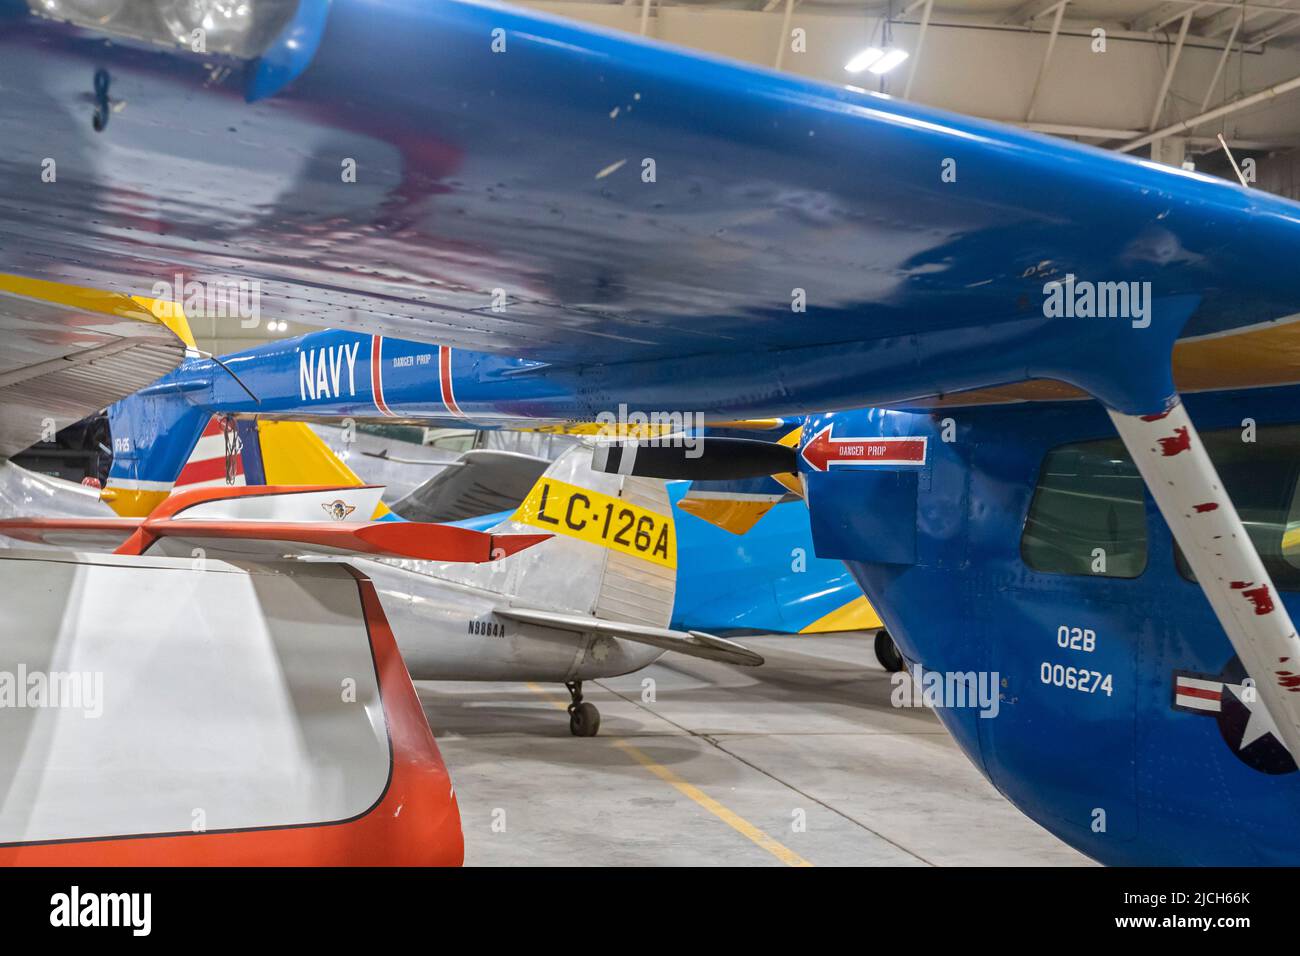 Liberal, Kansas - The Mid-America Air Museum. The museum displays over 100 aircraft Stock Photo